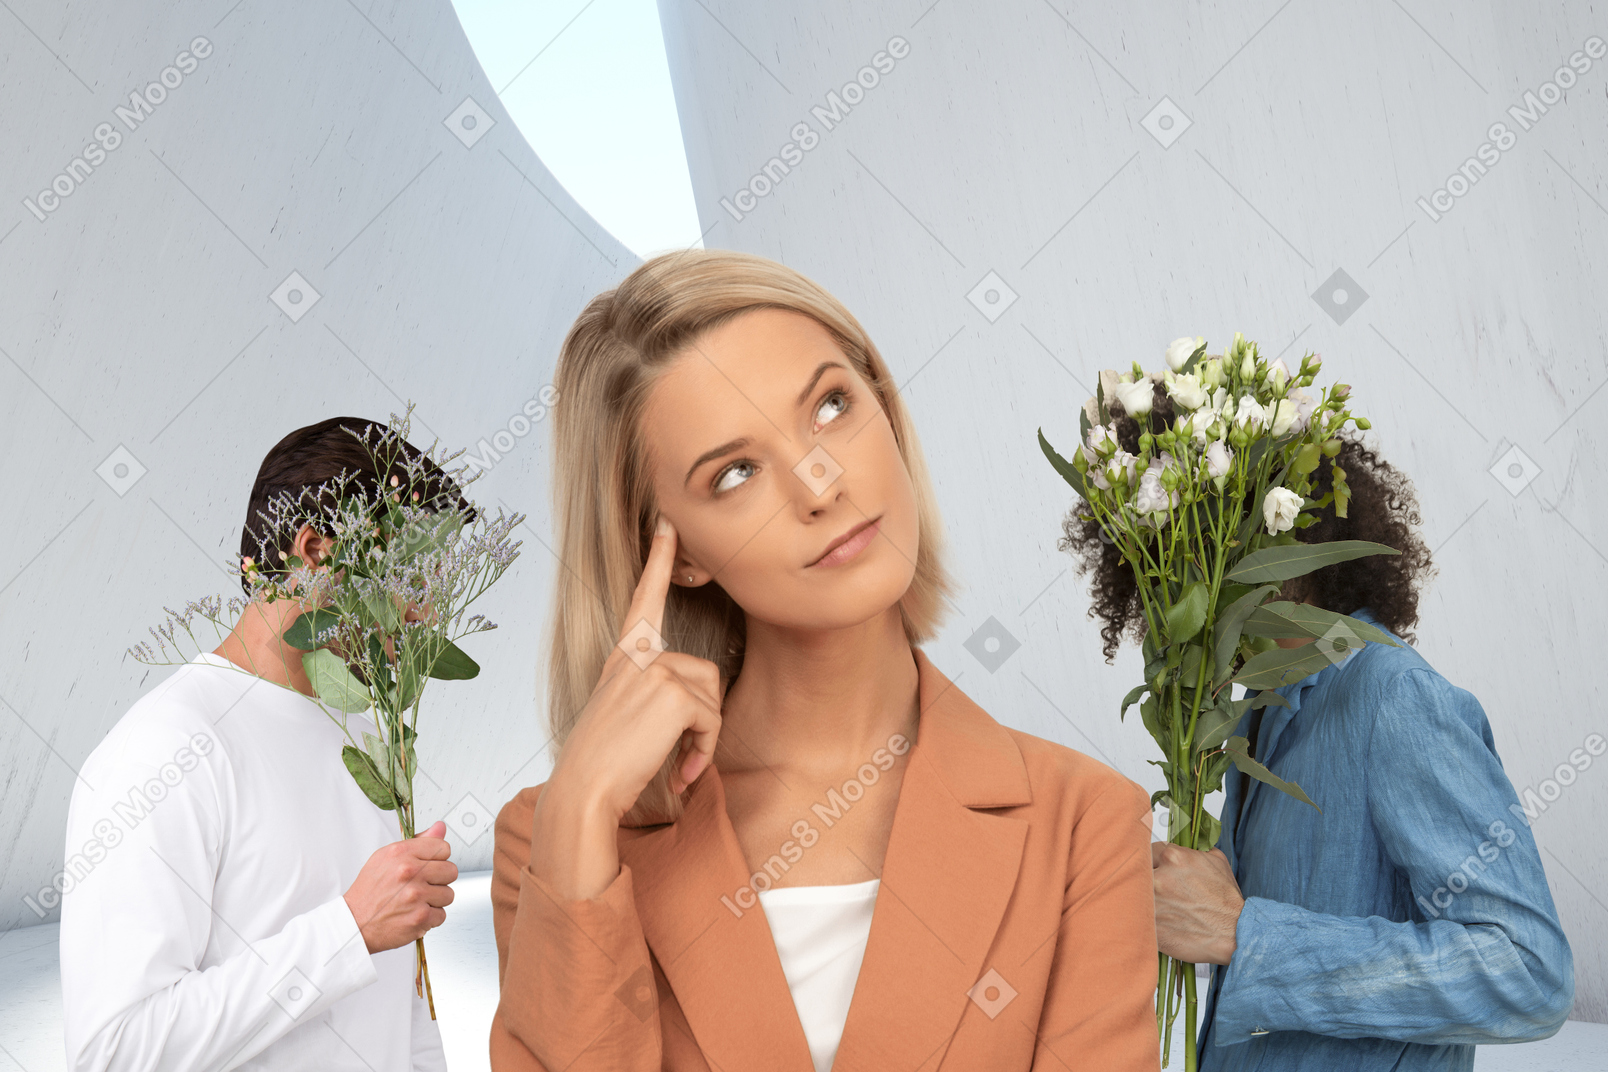 Men bringing bouquets to a woman